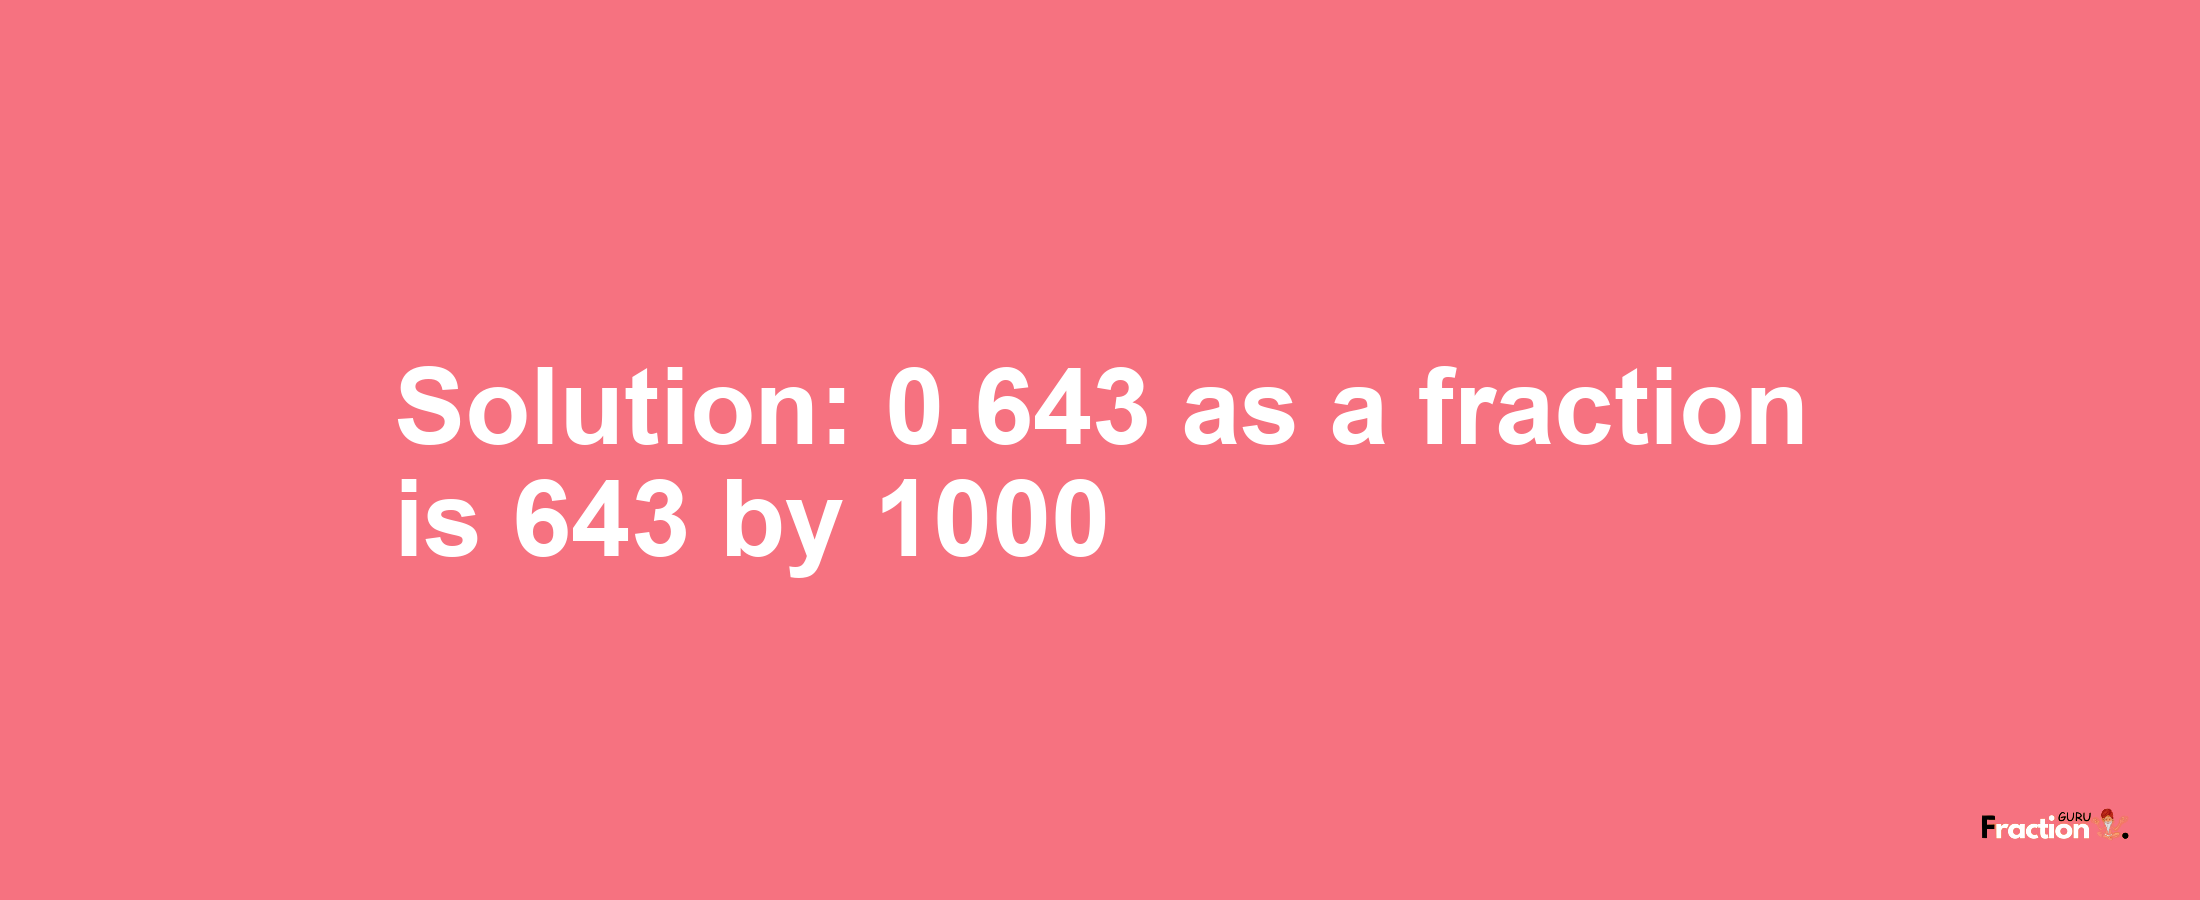 Solution:0.643 as a fraction is 643/1000